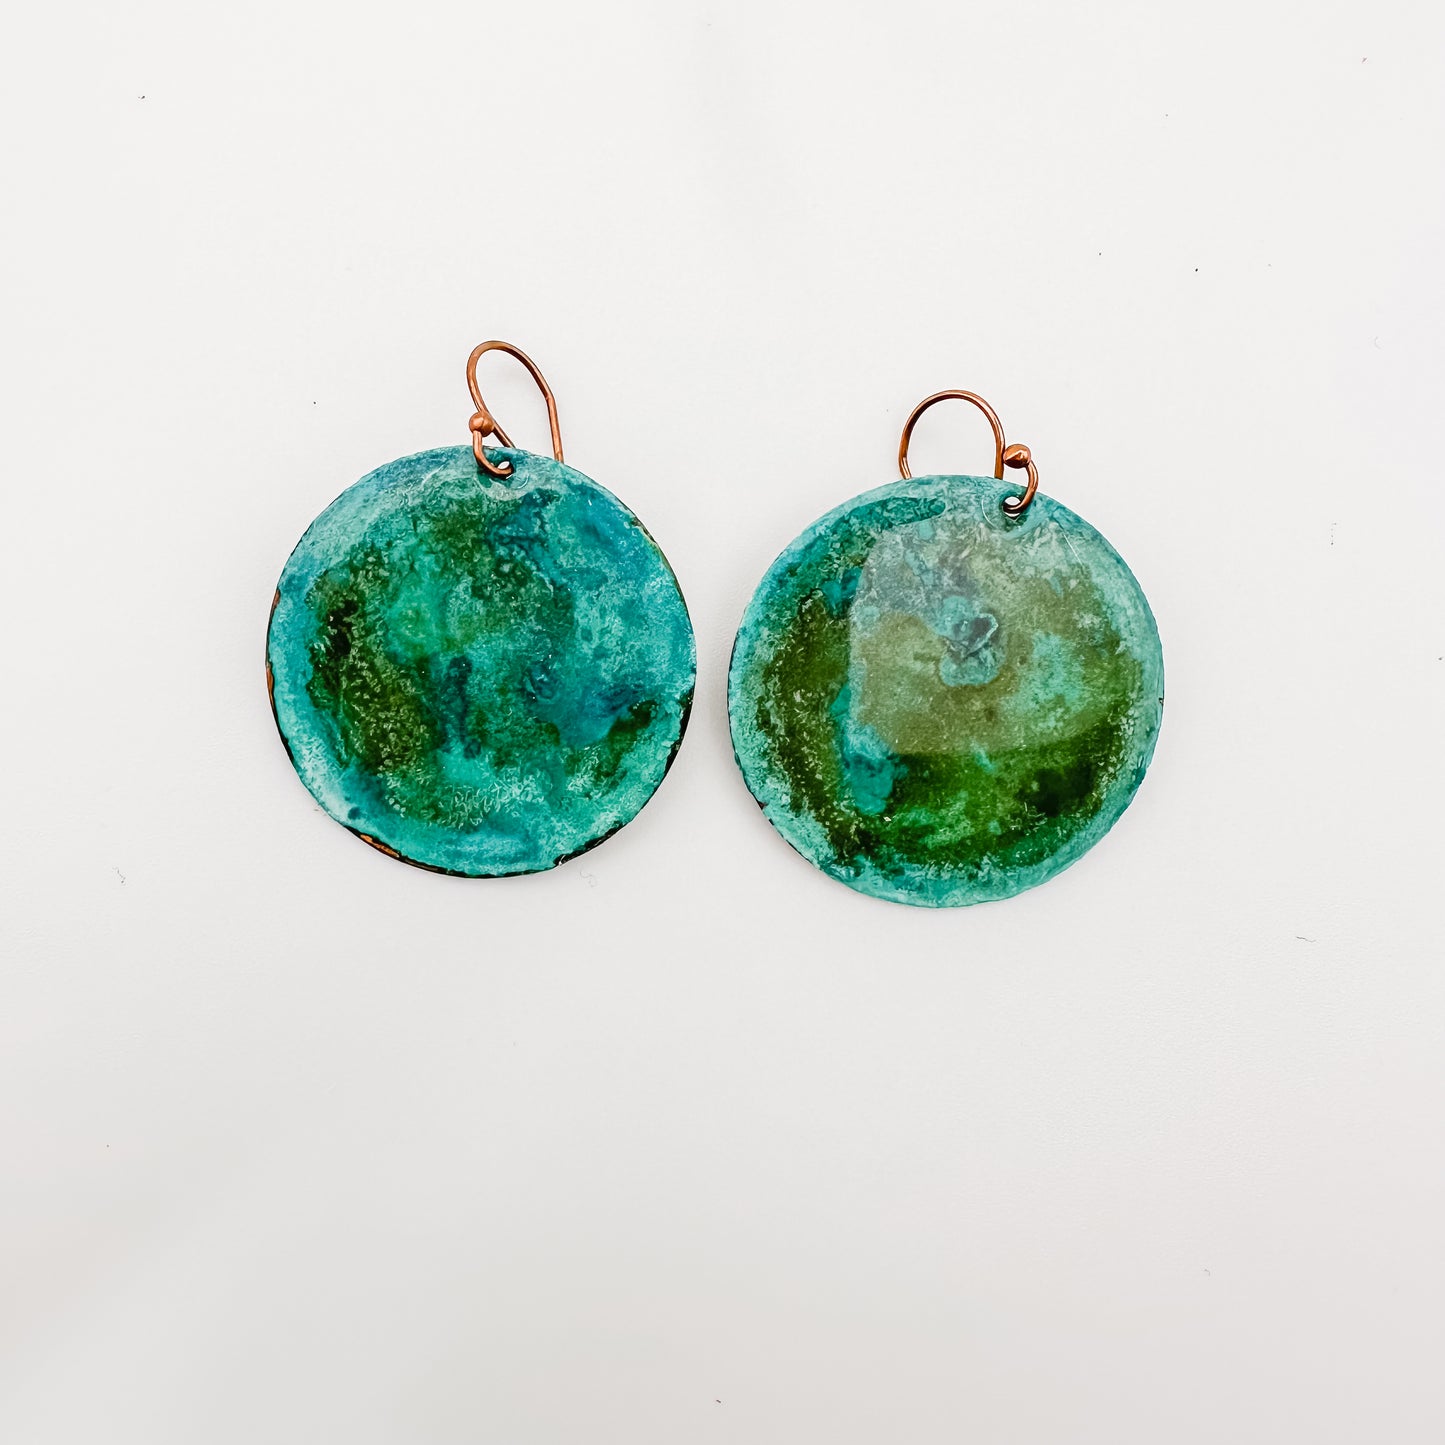 COPPER CIRCLE | Patina Earrings - Handcrafted Jewelry in Small, Medium, and Large Sizes"| One of a kind Circle earrings on Copper or brass